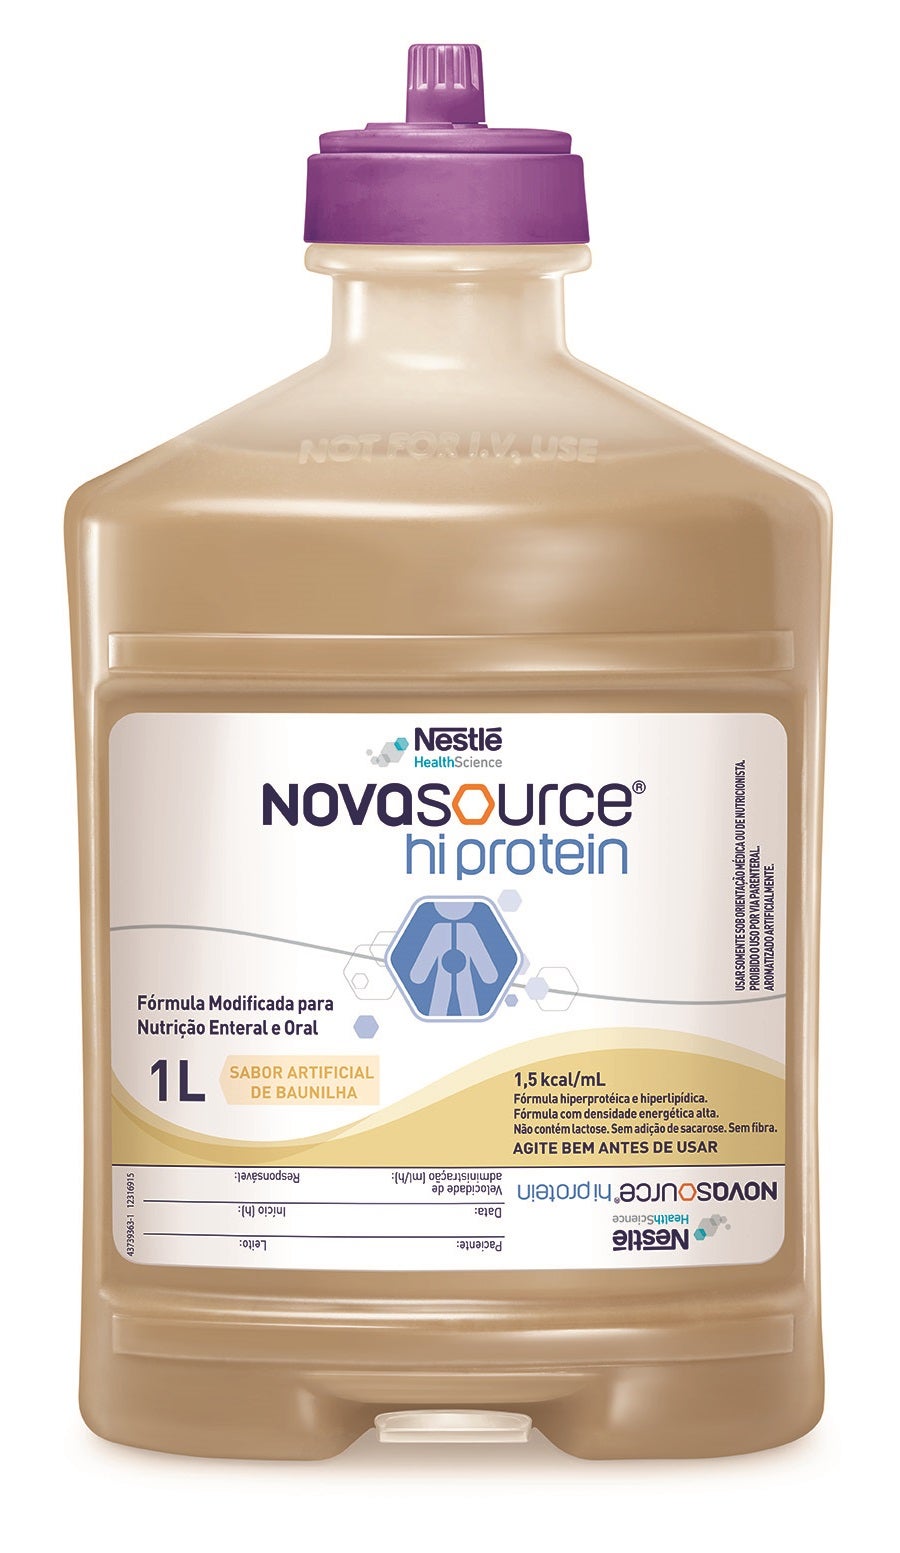 novasource-highprotein-pack-front